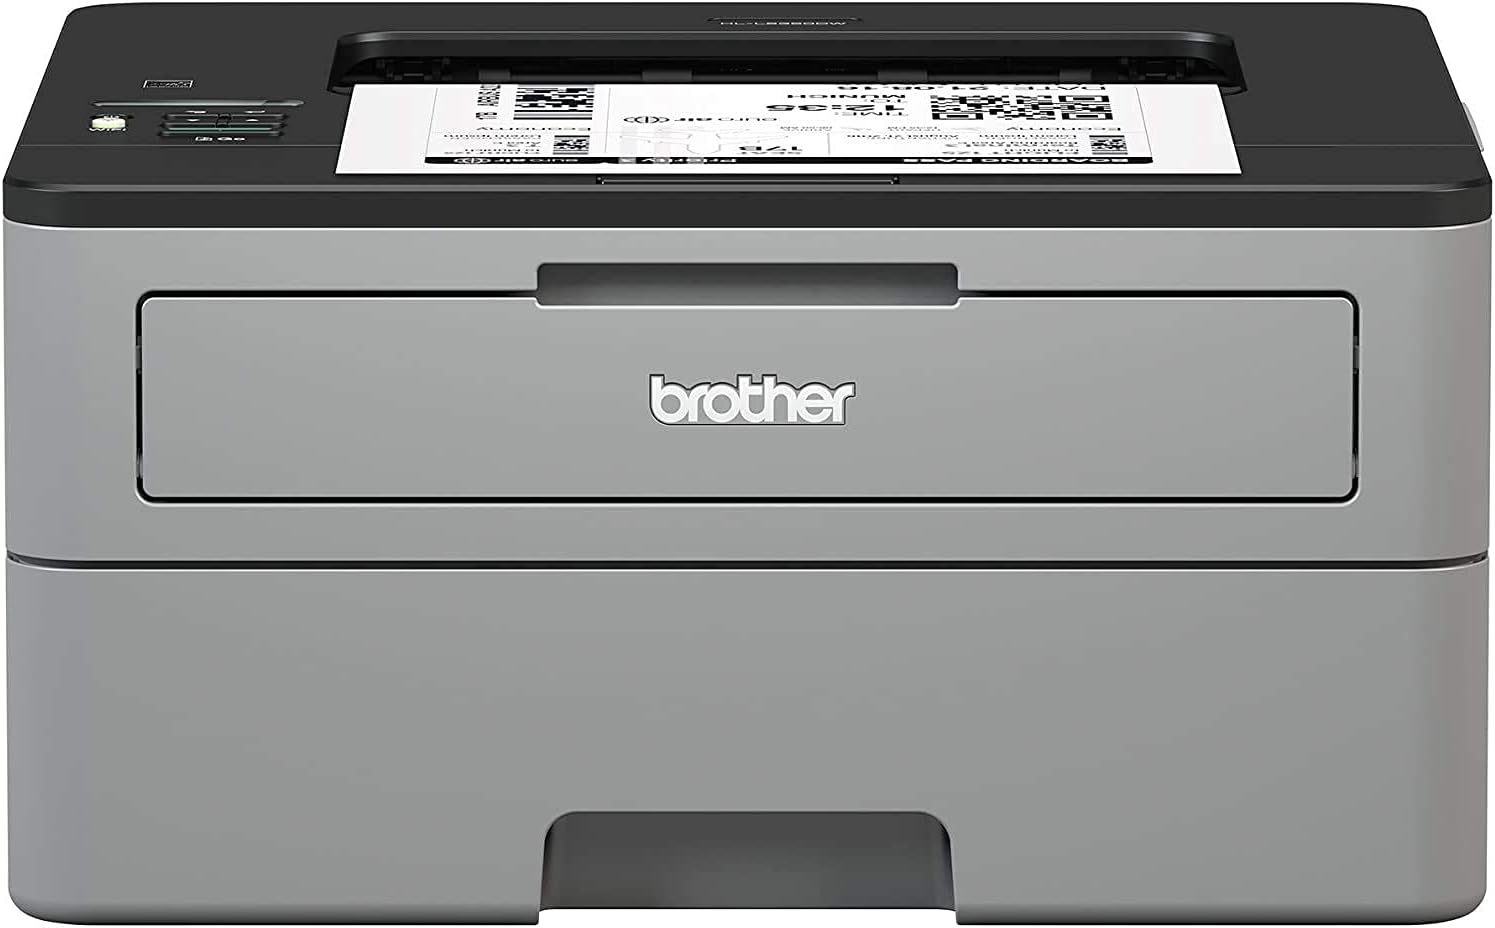 Examination of Brother HL-L2350DW Series Compact Wireless Monochrome Laser Printer